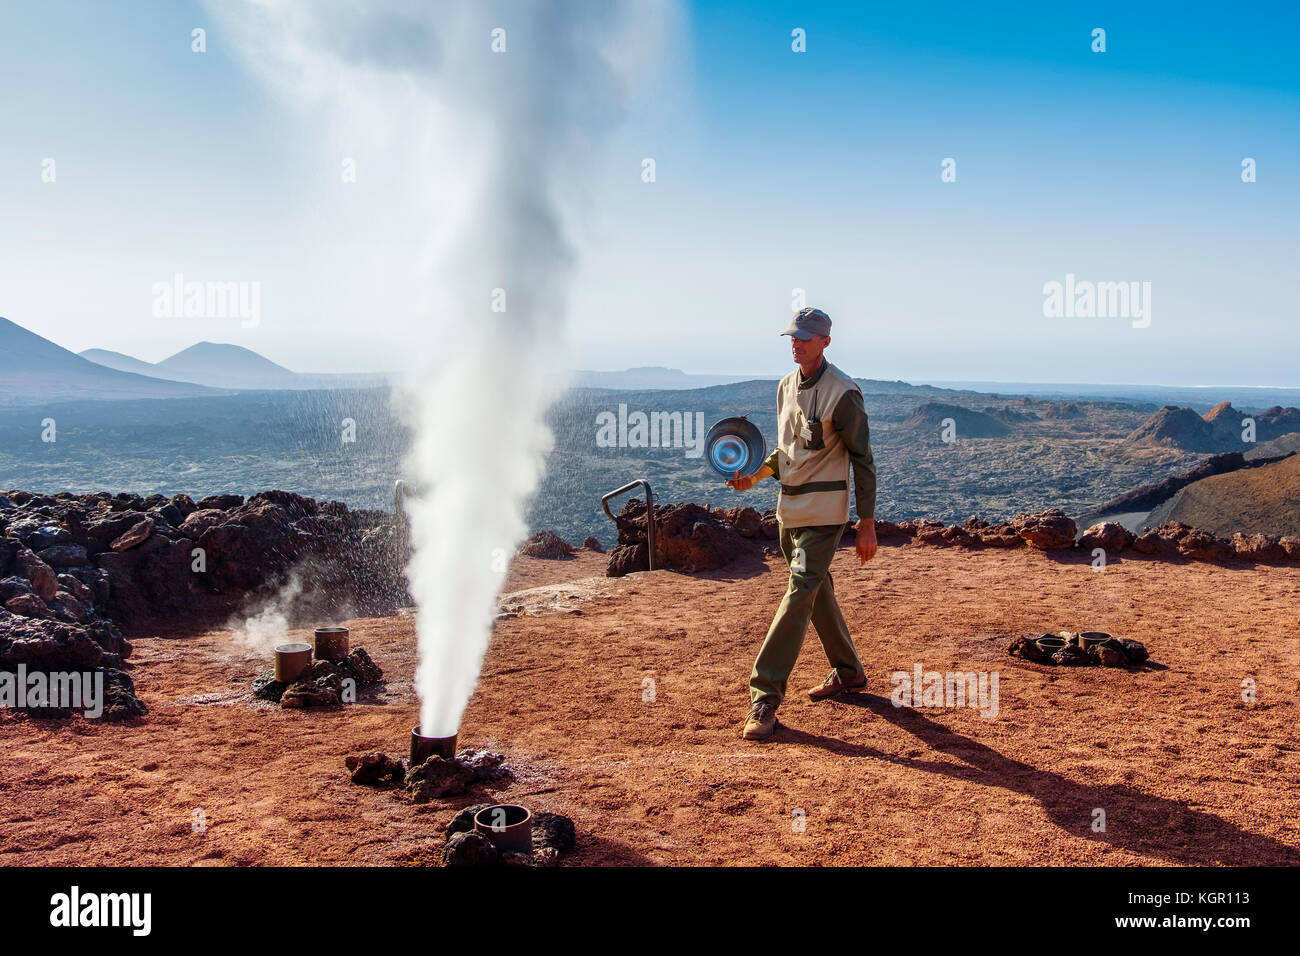 Artificial geyser, demonstrations of volcanic activity on the Islet of Hilario. Timanfaya National Park. Lanzarote Island. Canary Islands Spain. Europ Stock Photo